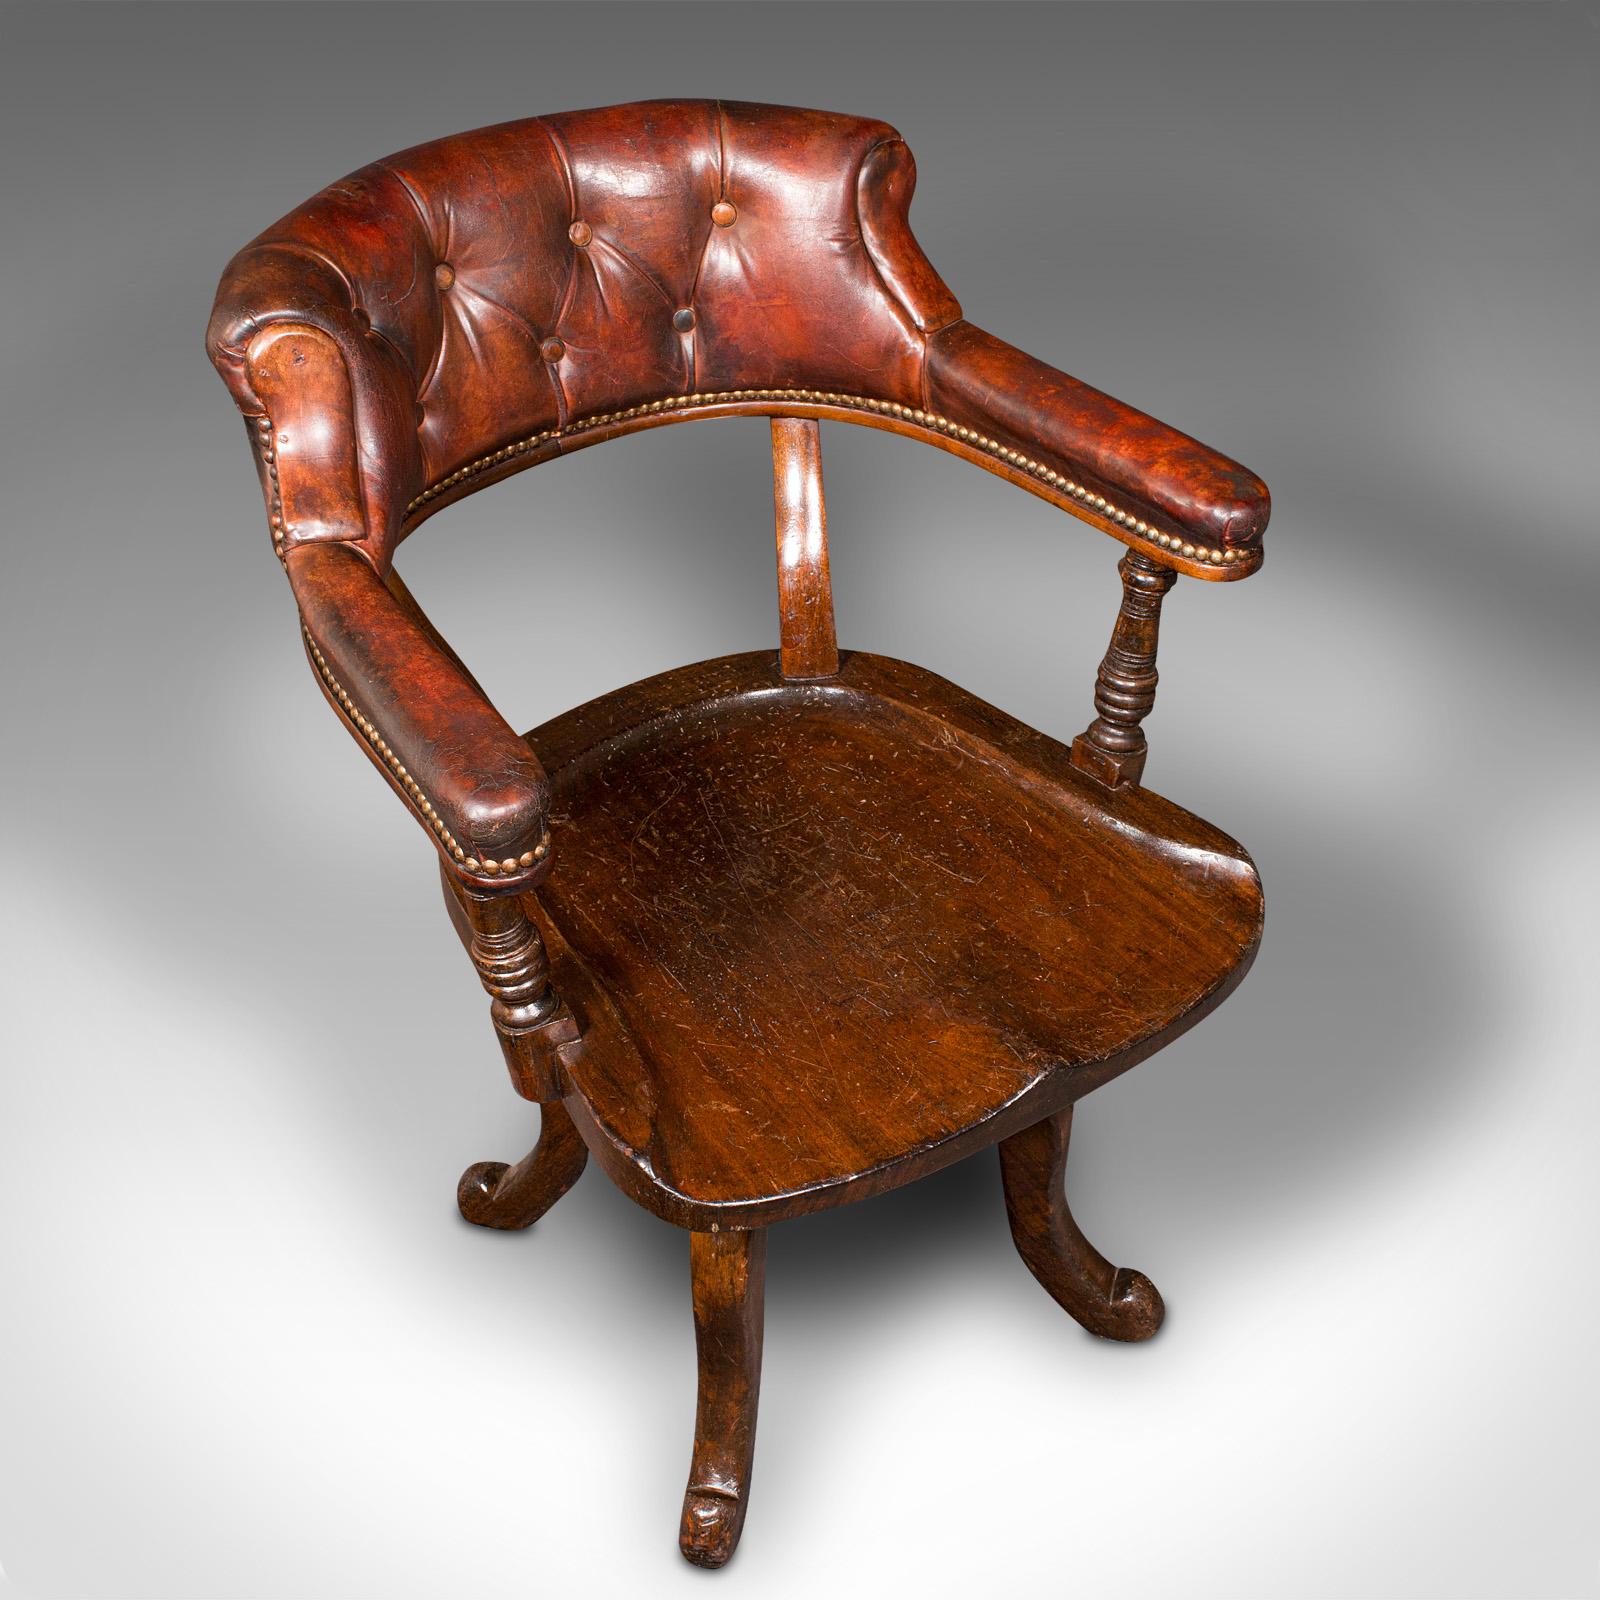 Antique Porter's Hall Chair, English, Leather, Rotary Desk Seat, Victorian, 1880 For Sale 1